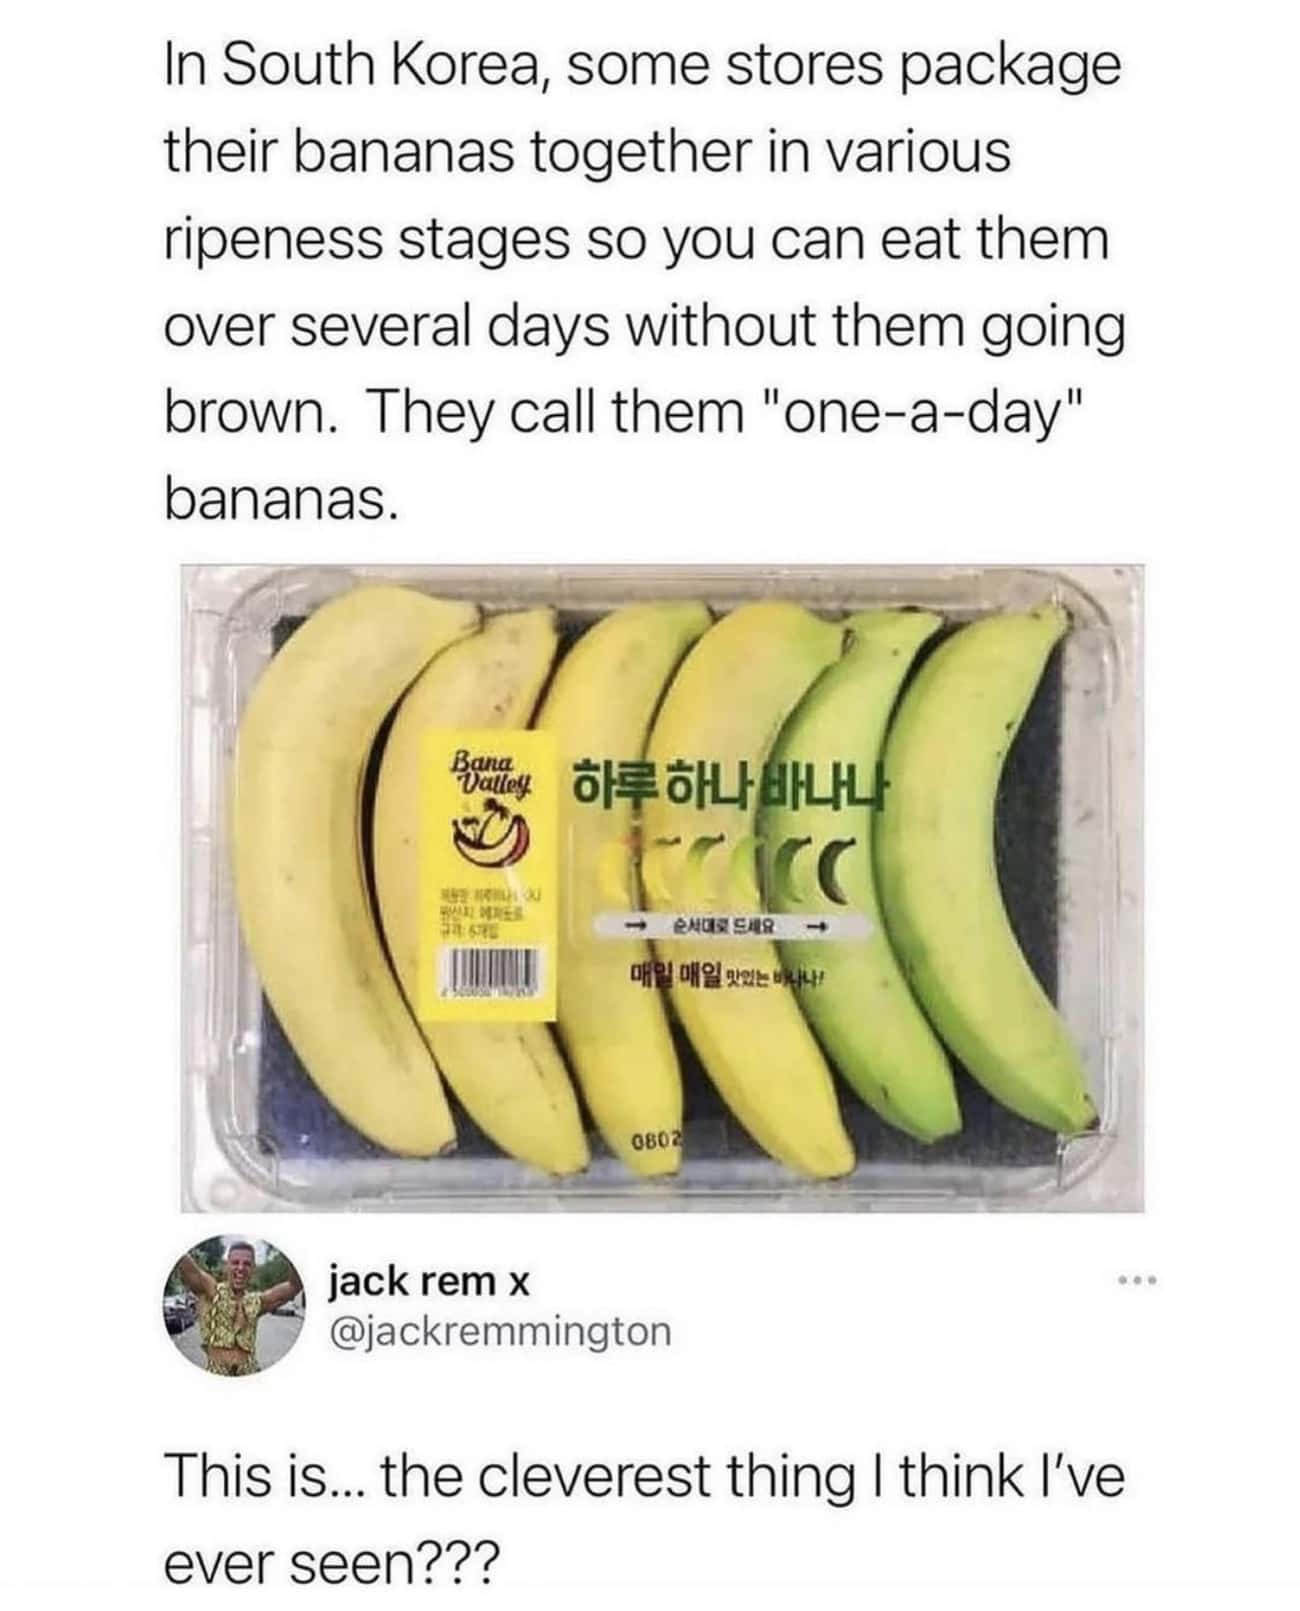 One-A-Day Bananas